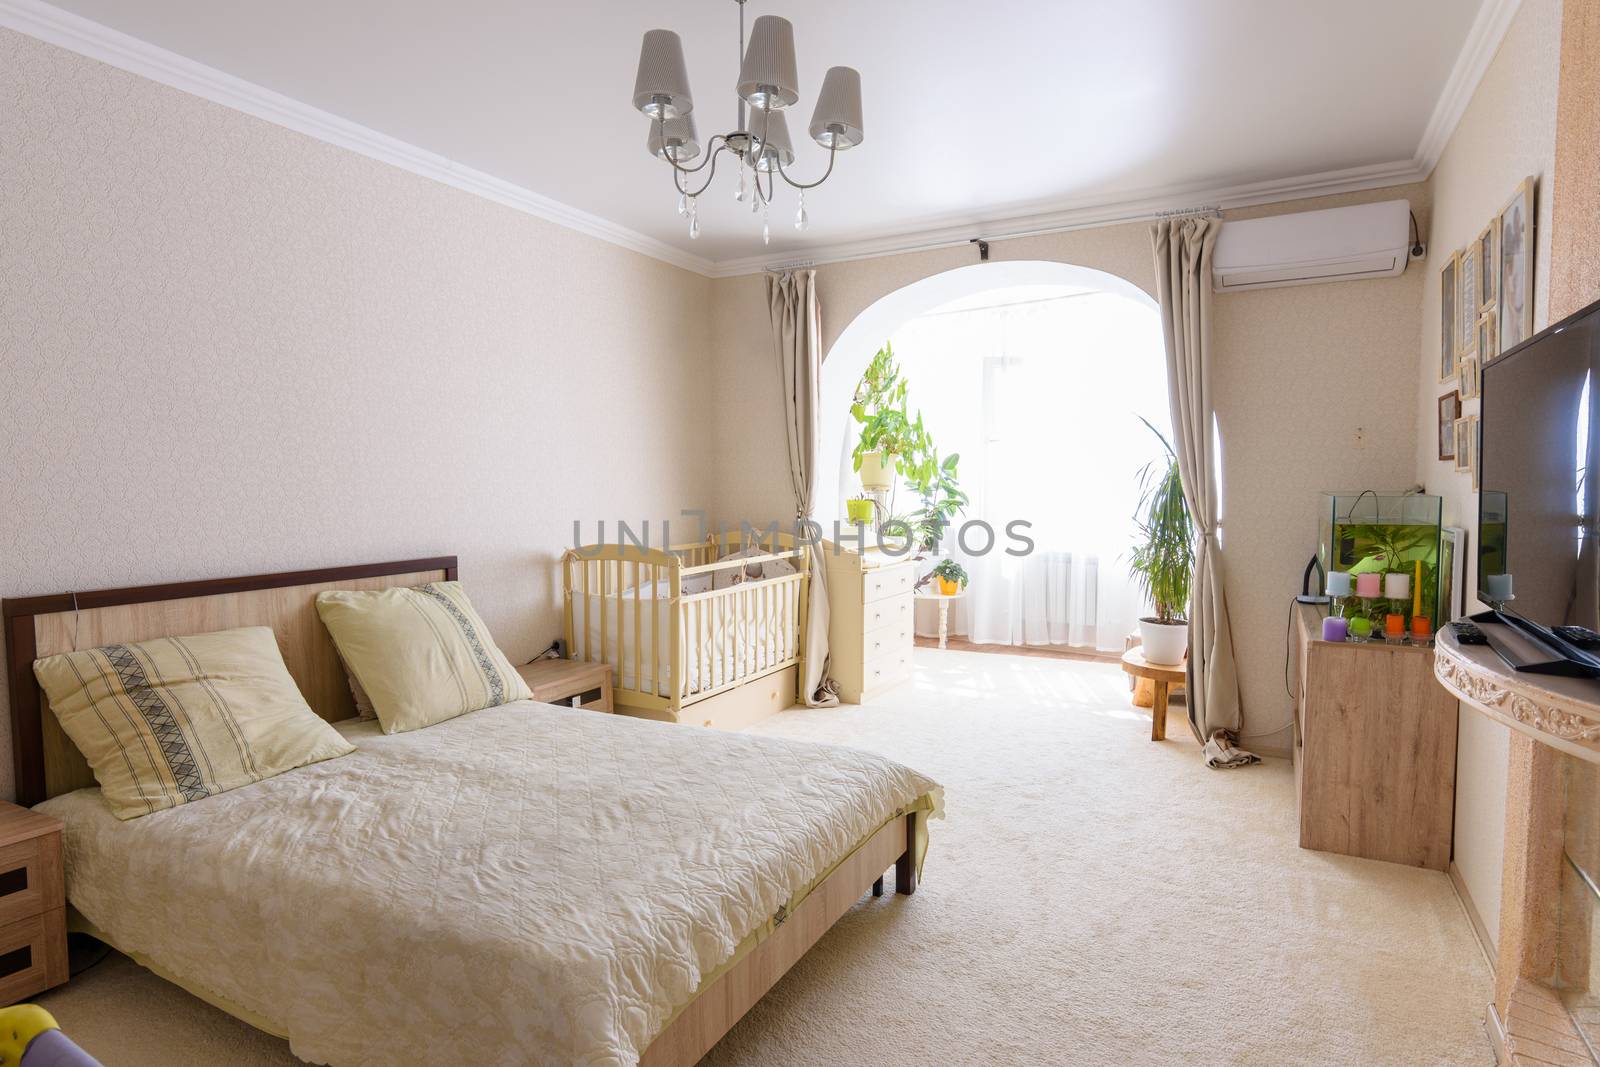 Nice interior of a bedroom combined with a balcony and a crib for a newborn baby by Madhourse